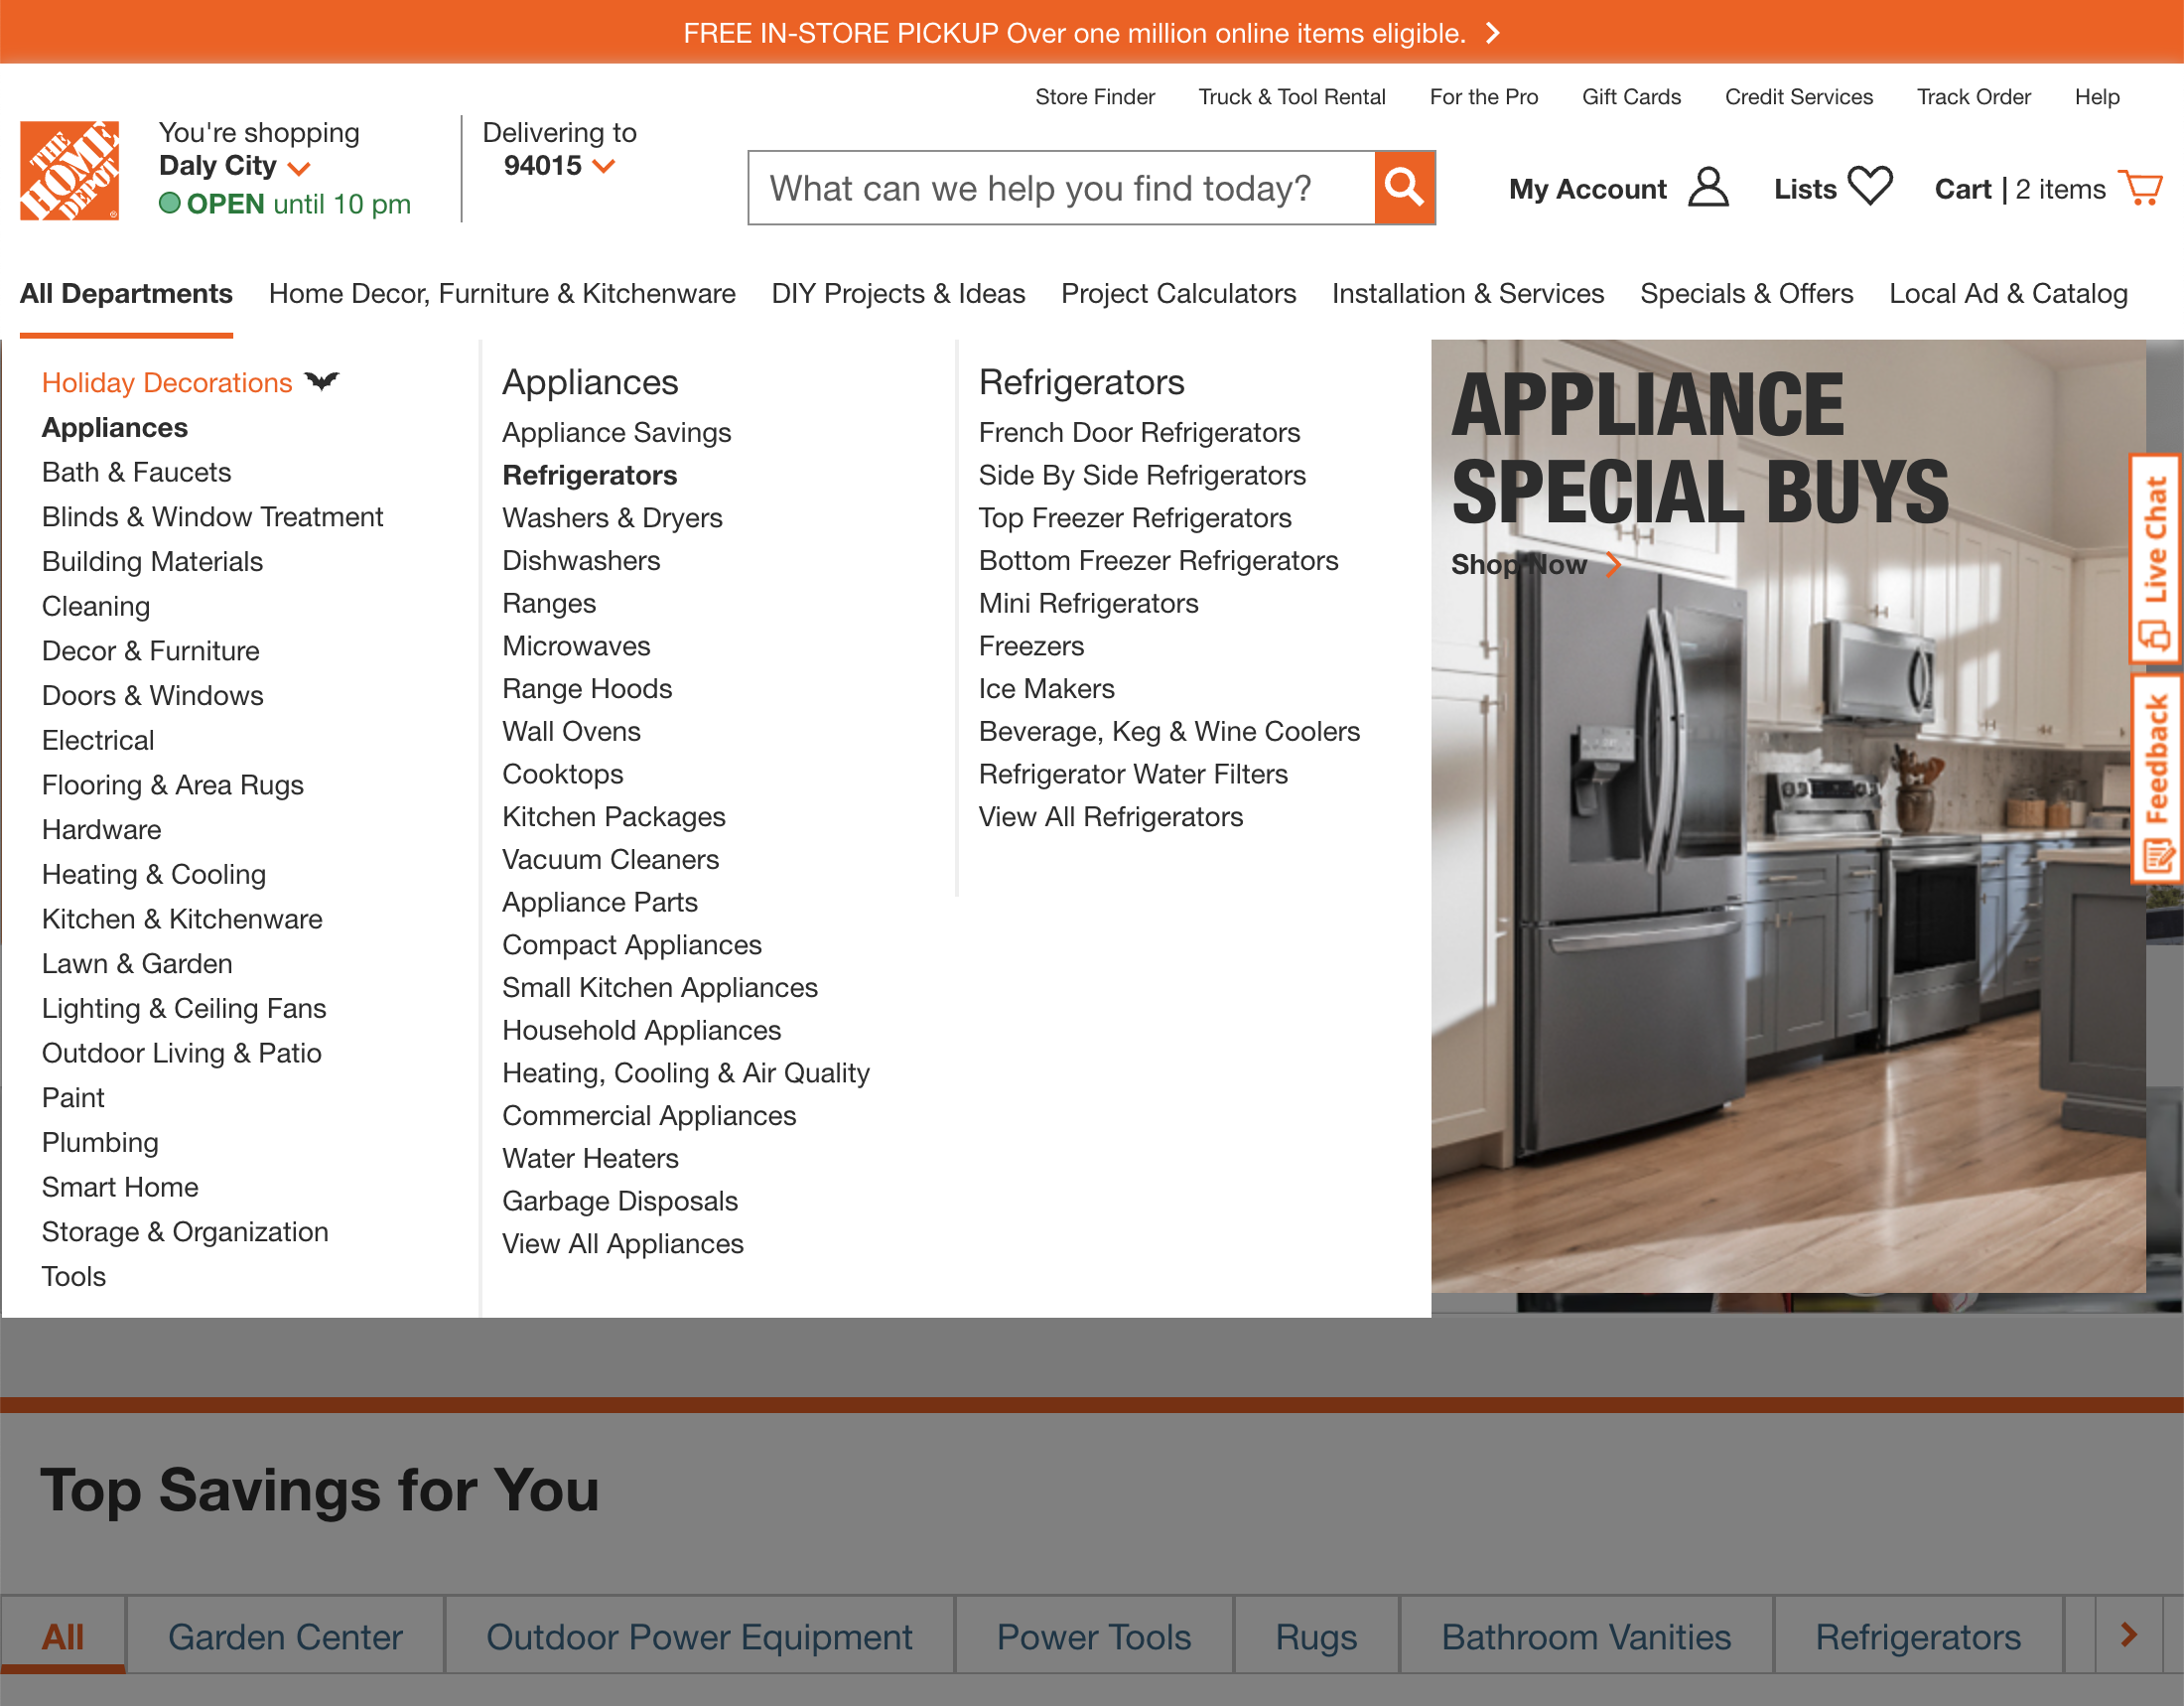 Compact Appliances at the Home Depot